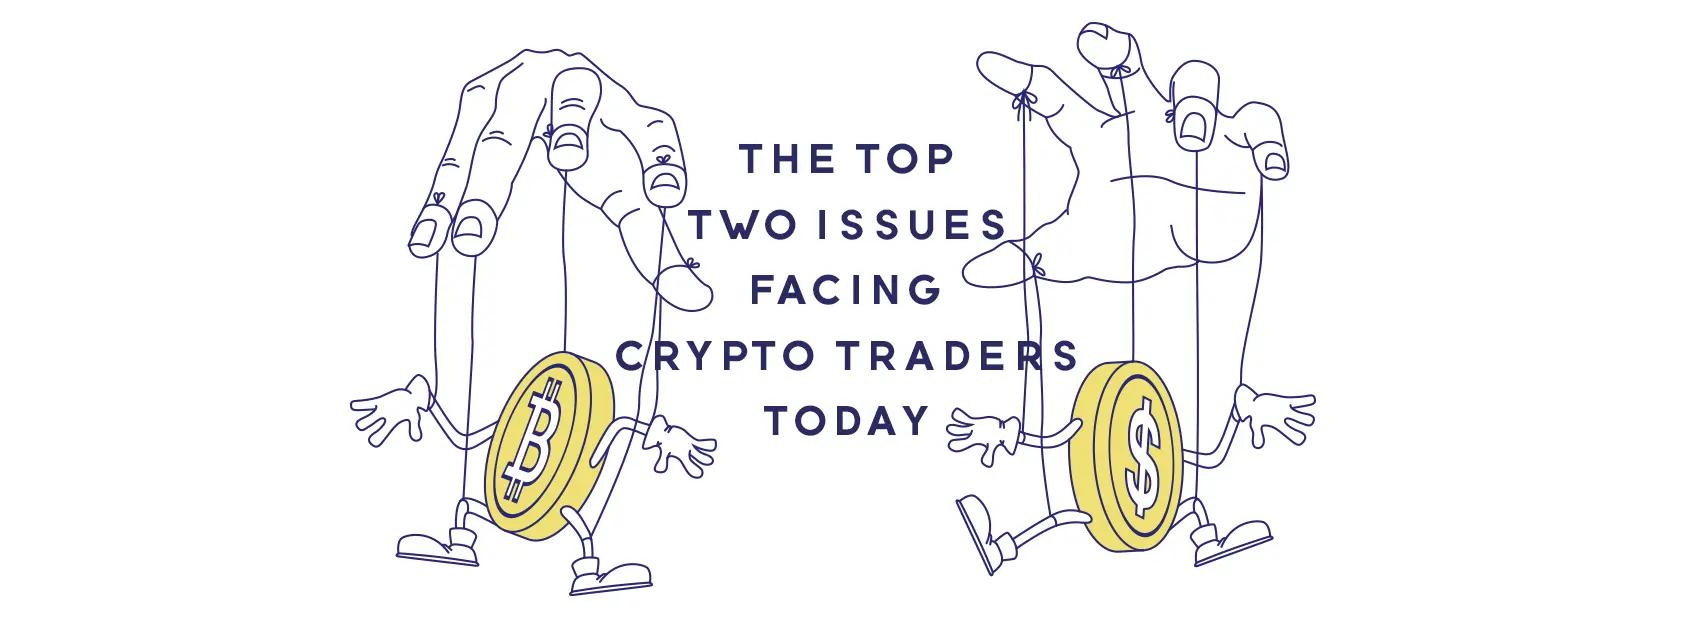 The Top Two Issues Facing Cryptocurrency Traders Today